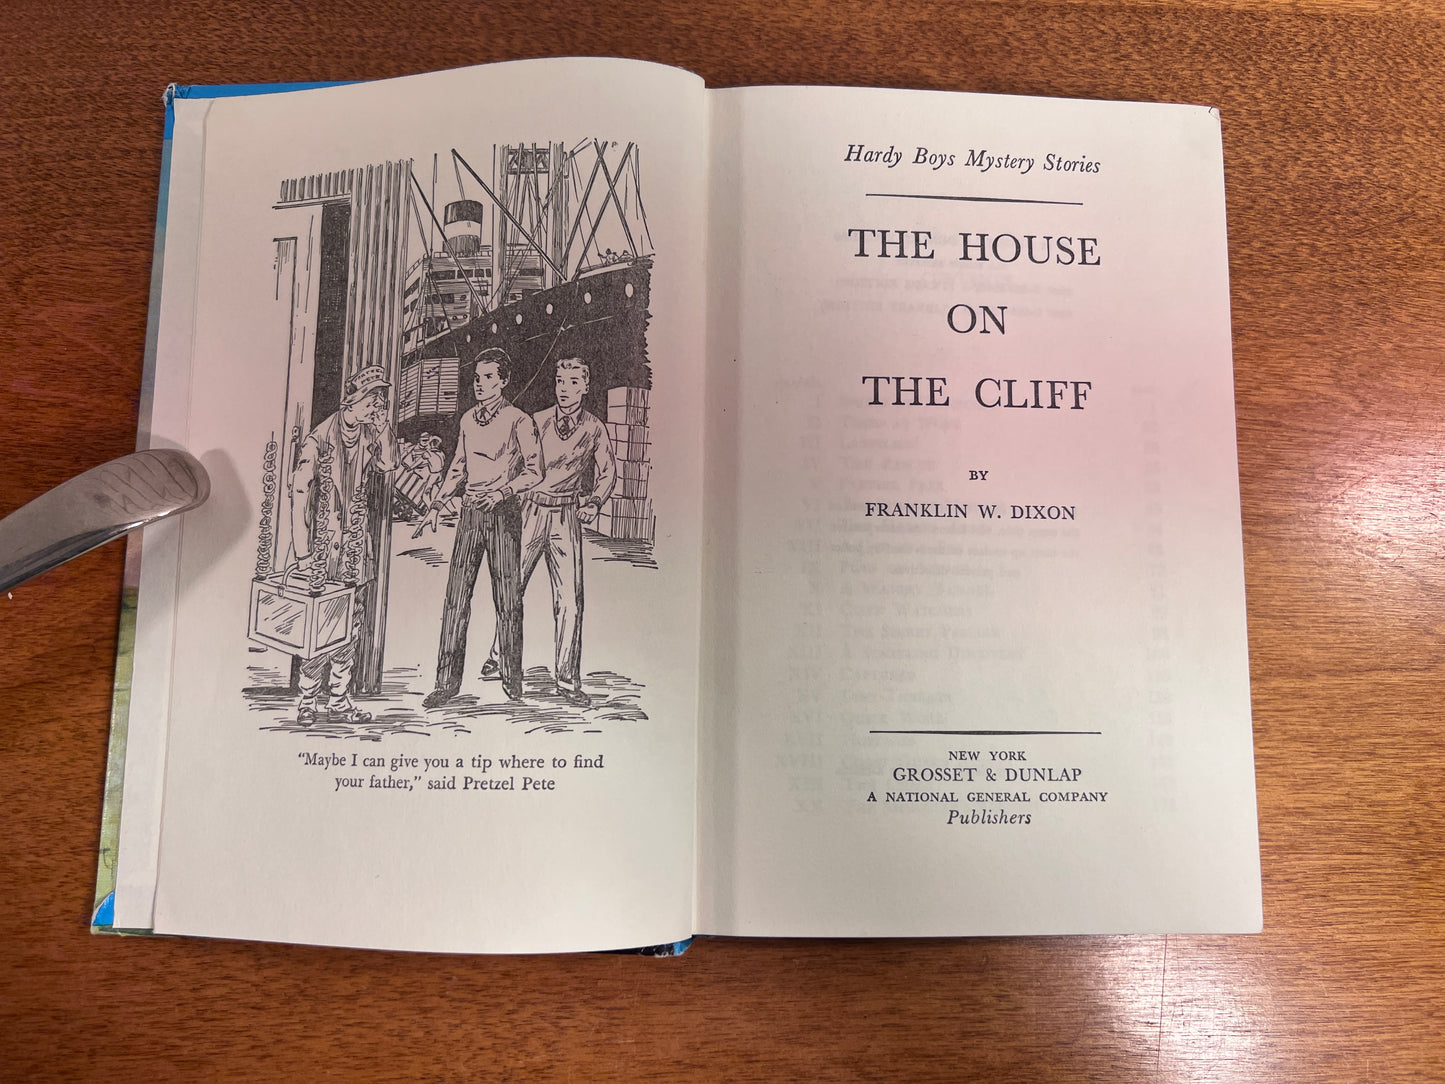 The House on the Cliff #2 by Franklin W. Dixon - The Hardy Boys